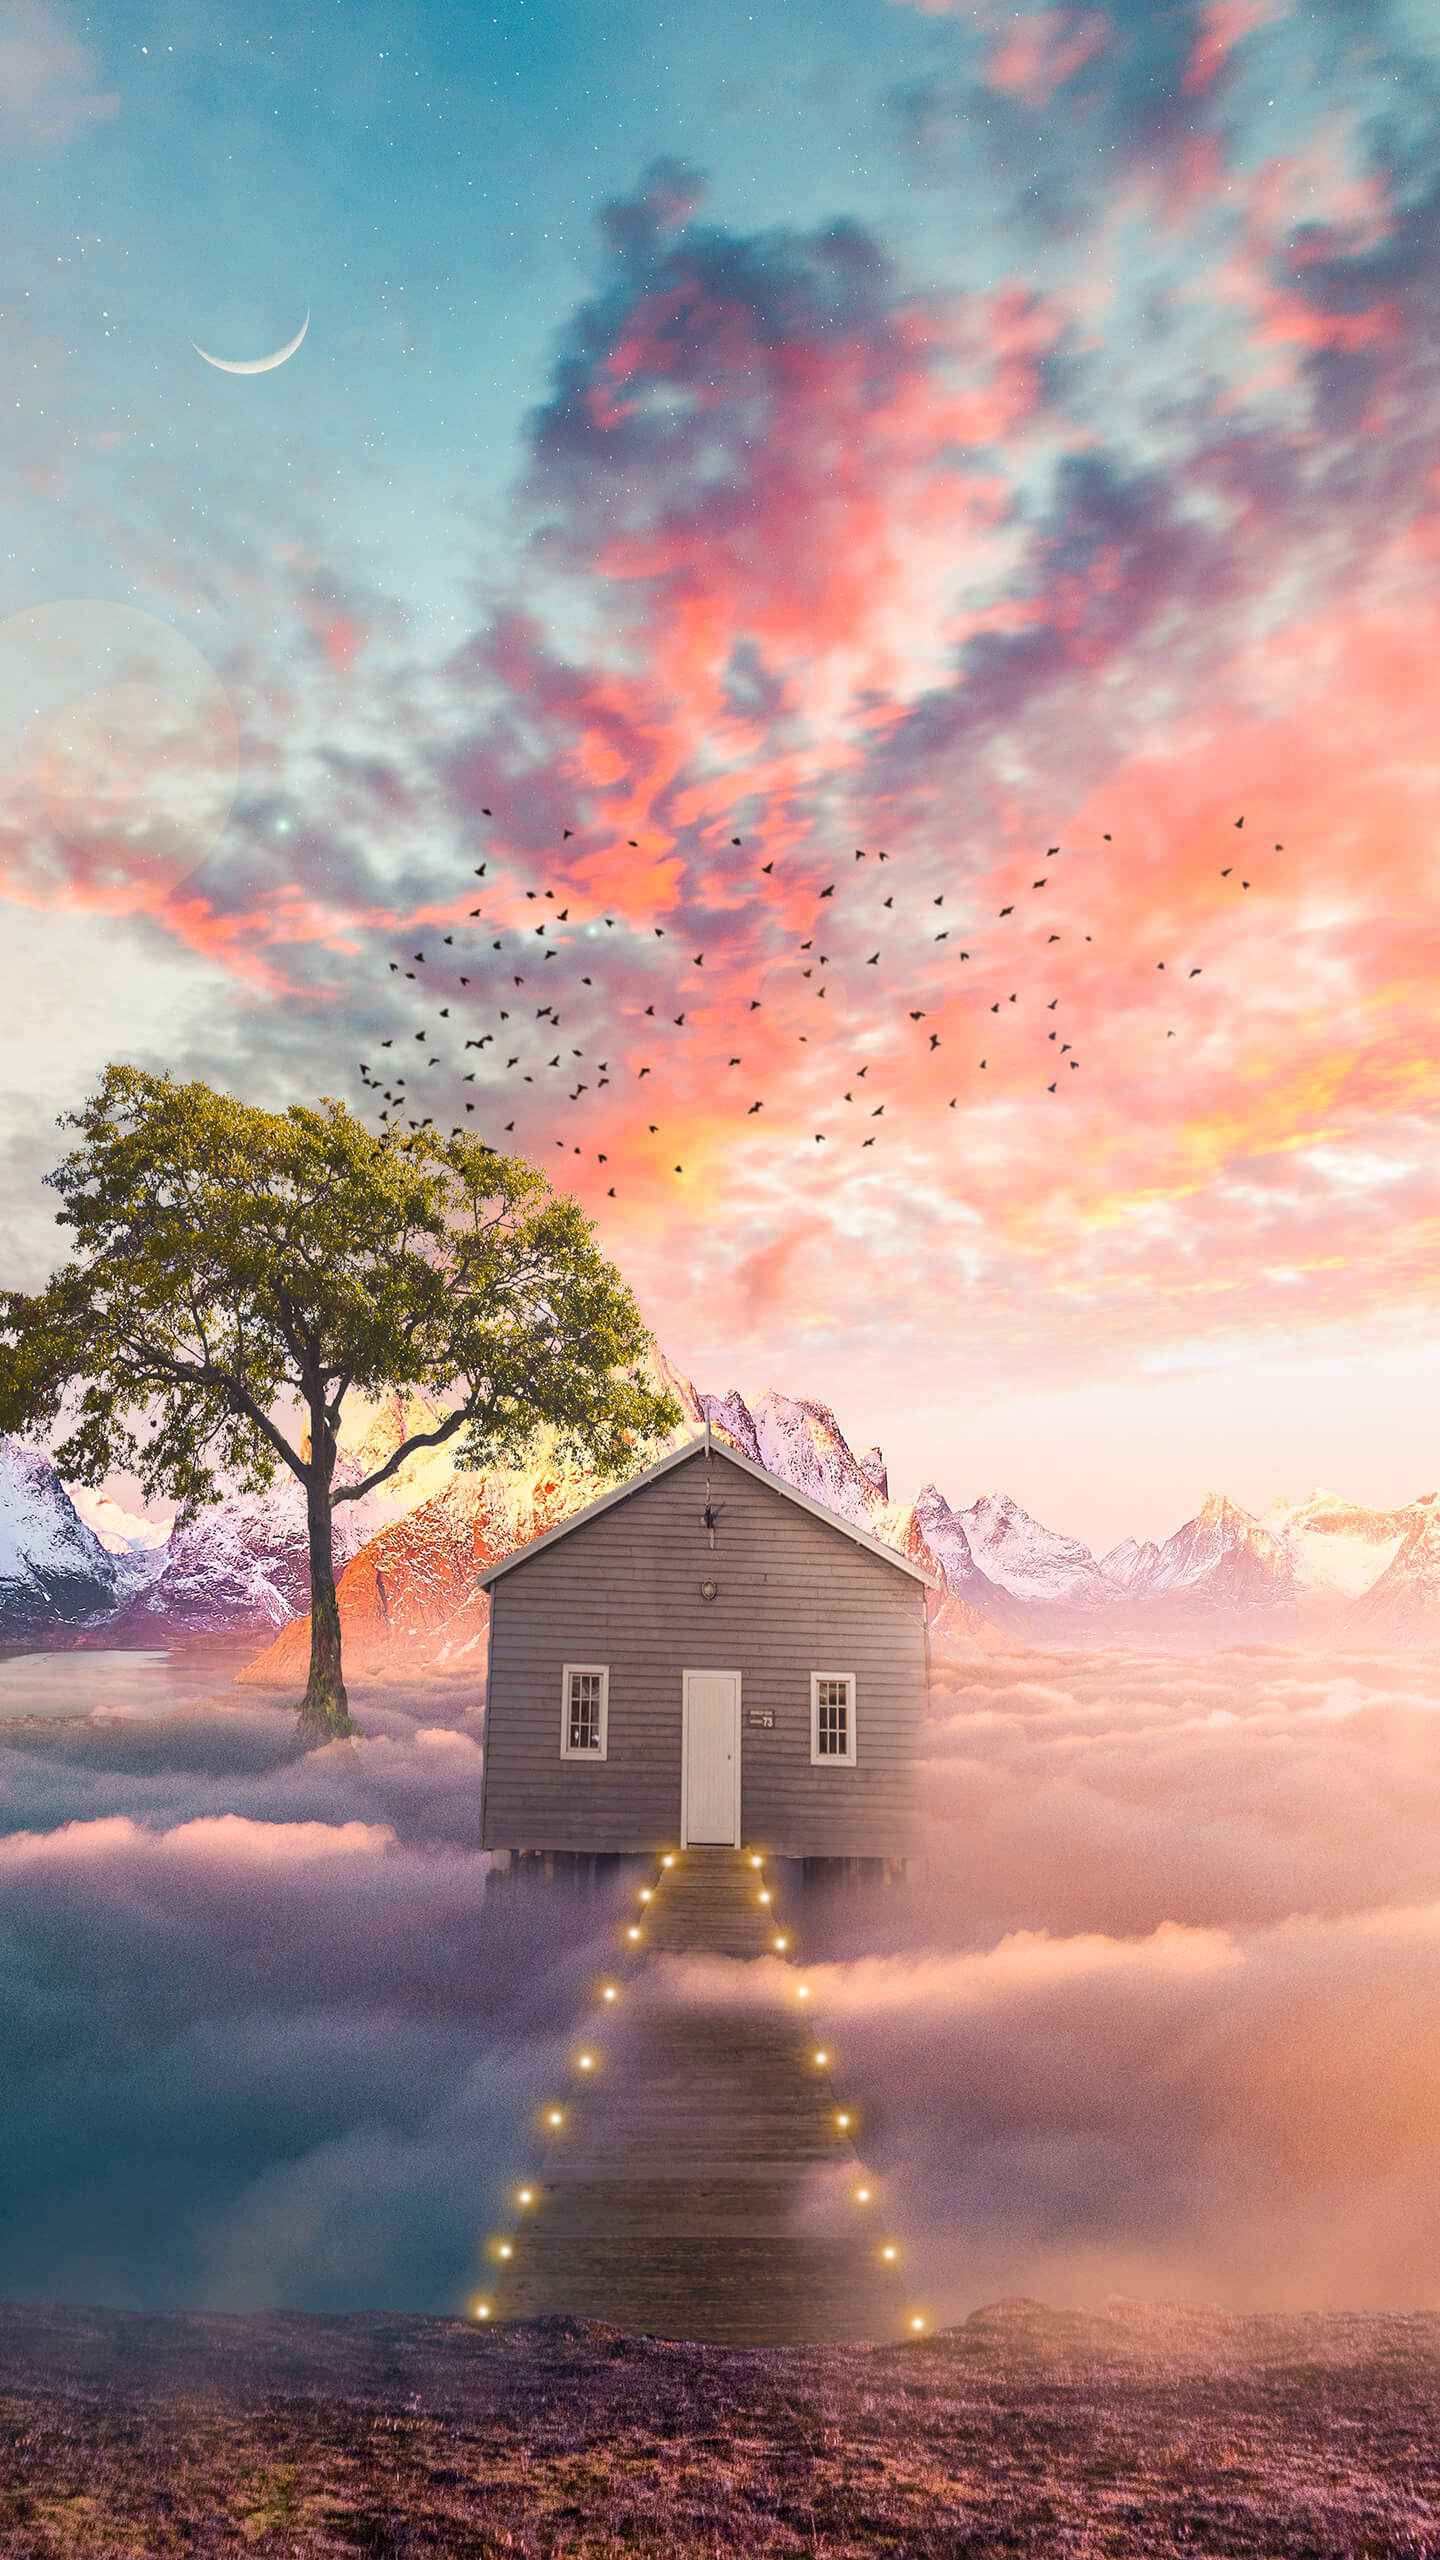 Nature House iPhone Wallpaper - iPhone Wallpapers : iPhone ...